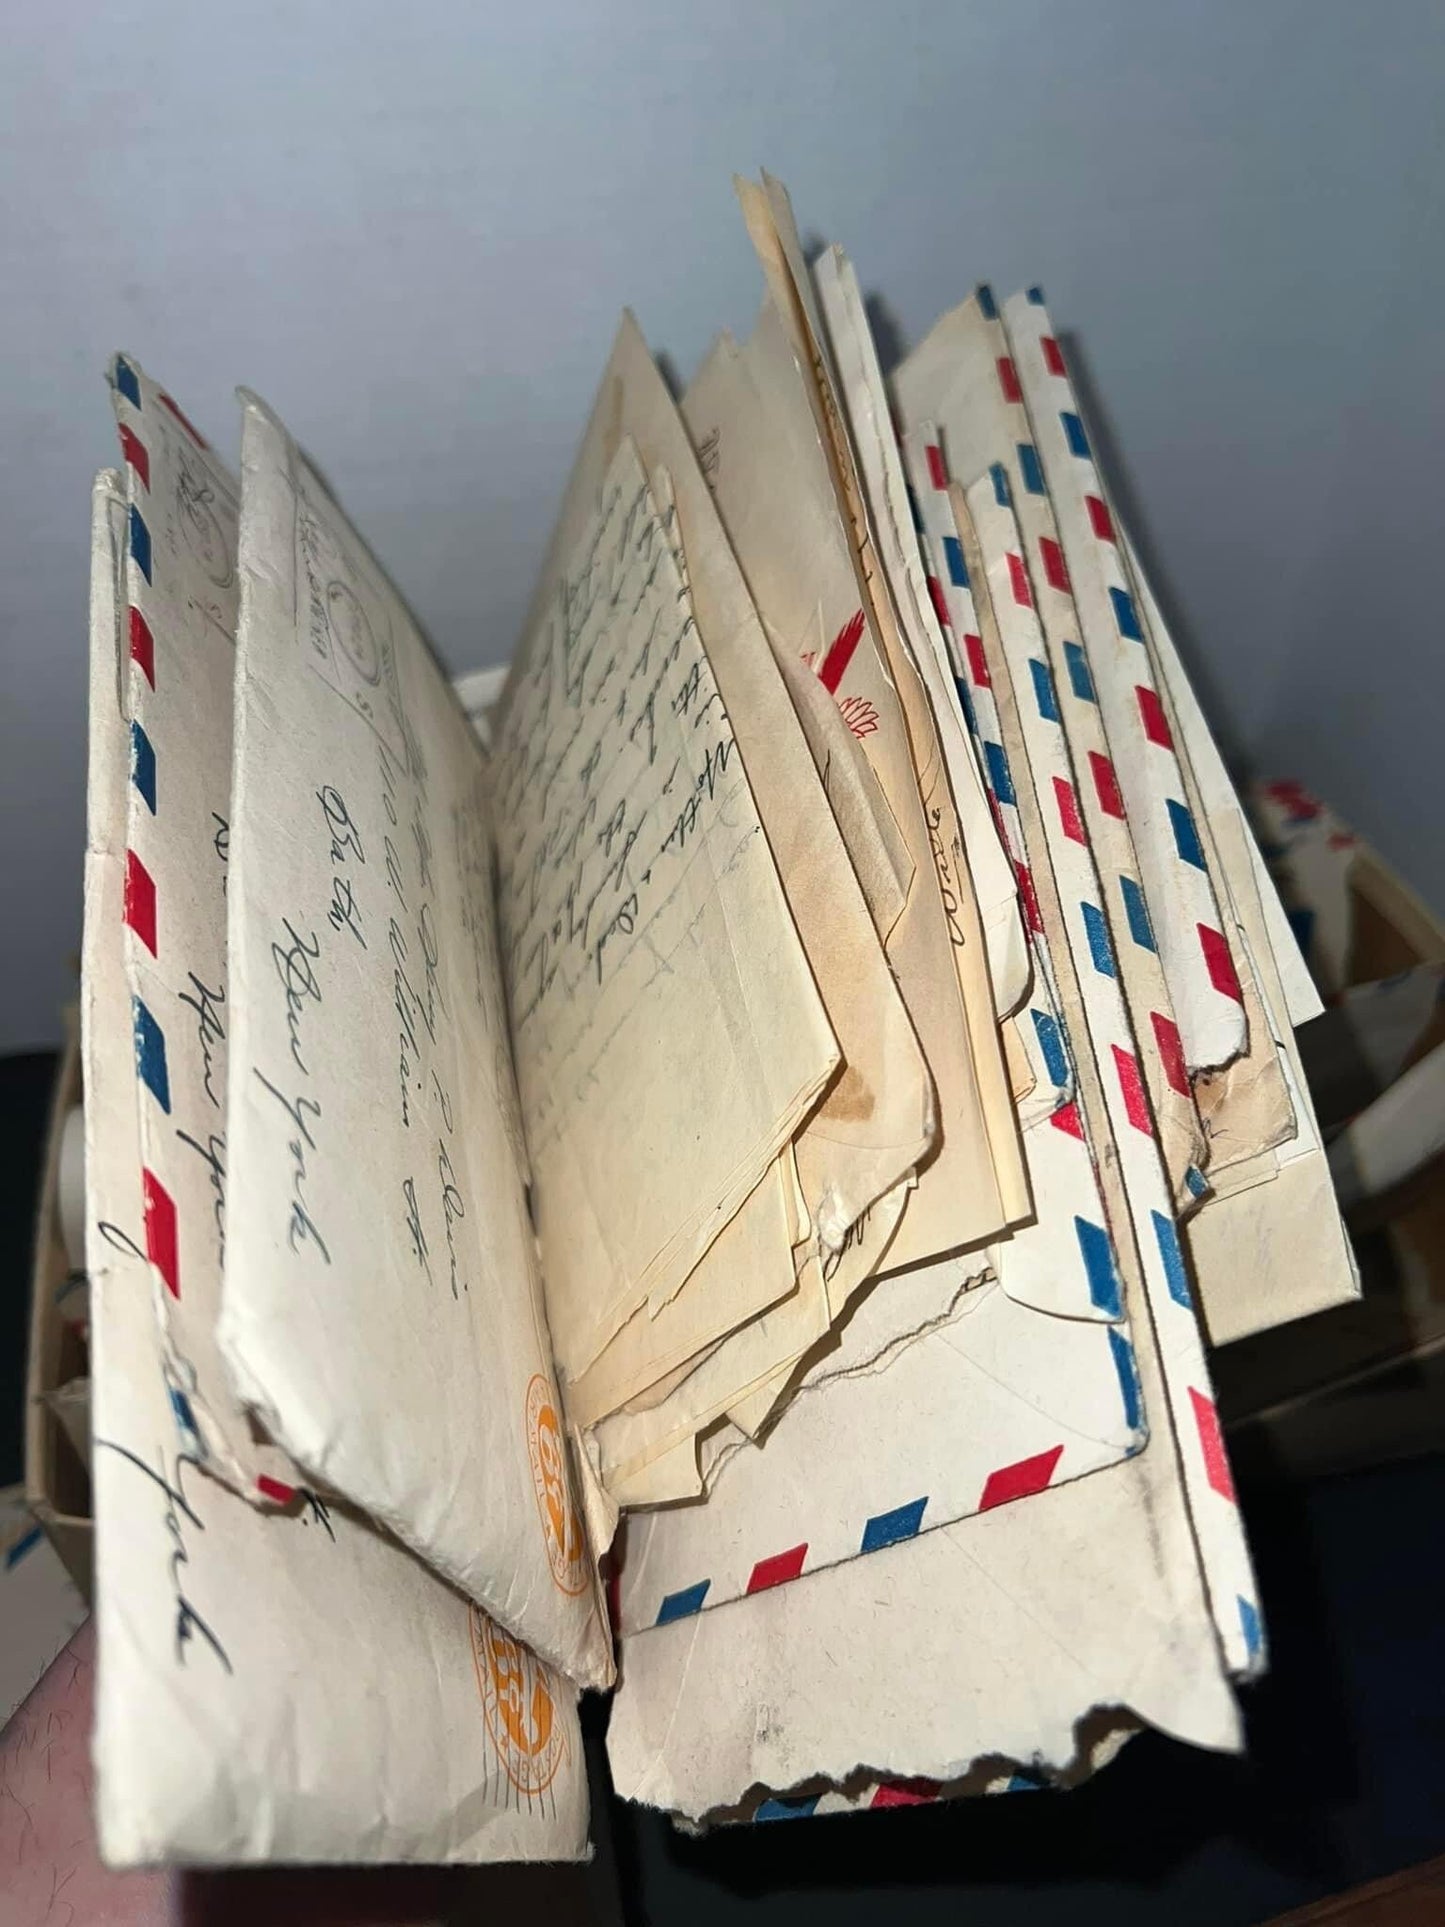 Antique ww2 handwritten letters collection Air Force Sargent Harry davis 1940s correspondence New York